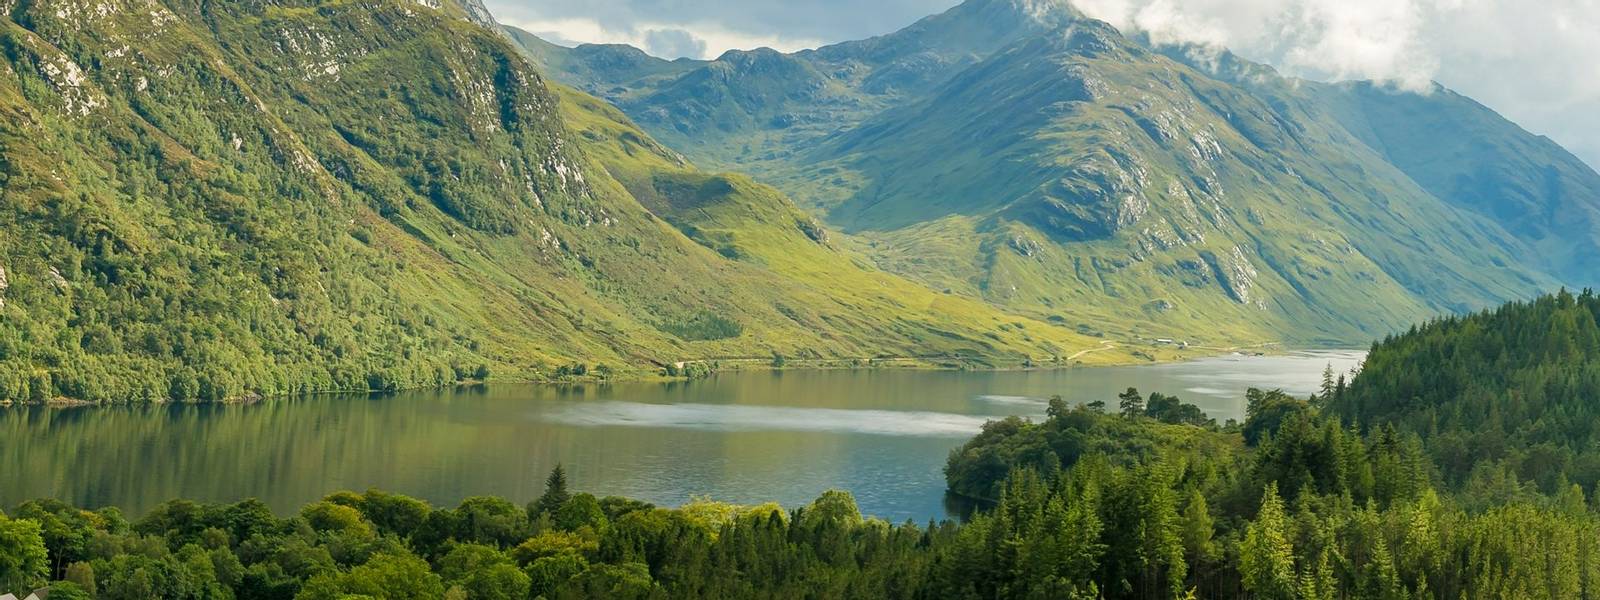 View of Glenfinnan in Highlands mountains in Scotland